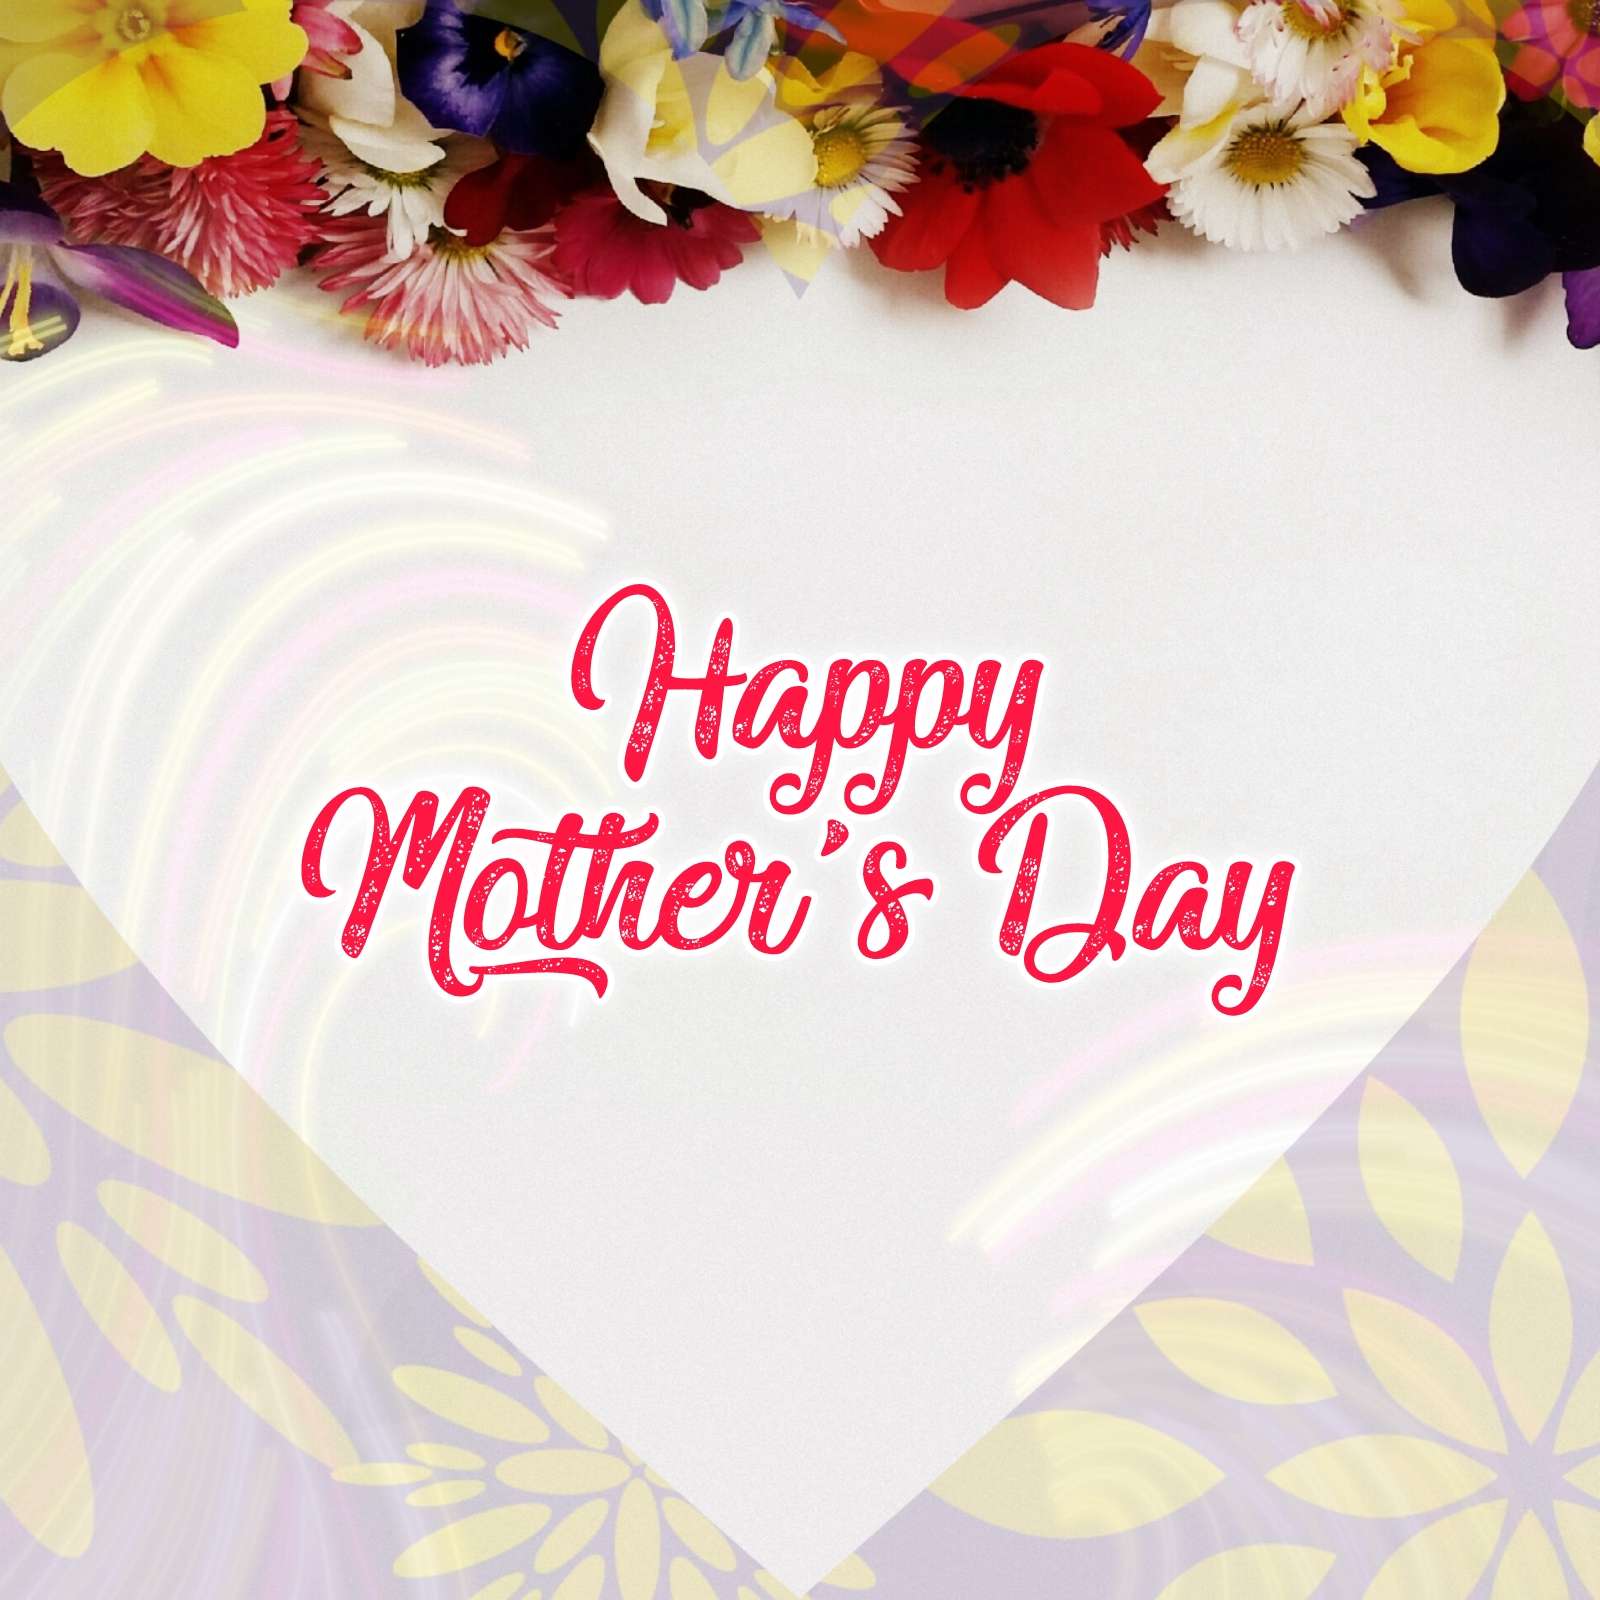 Happy Mothers Day HD wallpapers free download  Wallpaperbetter